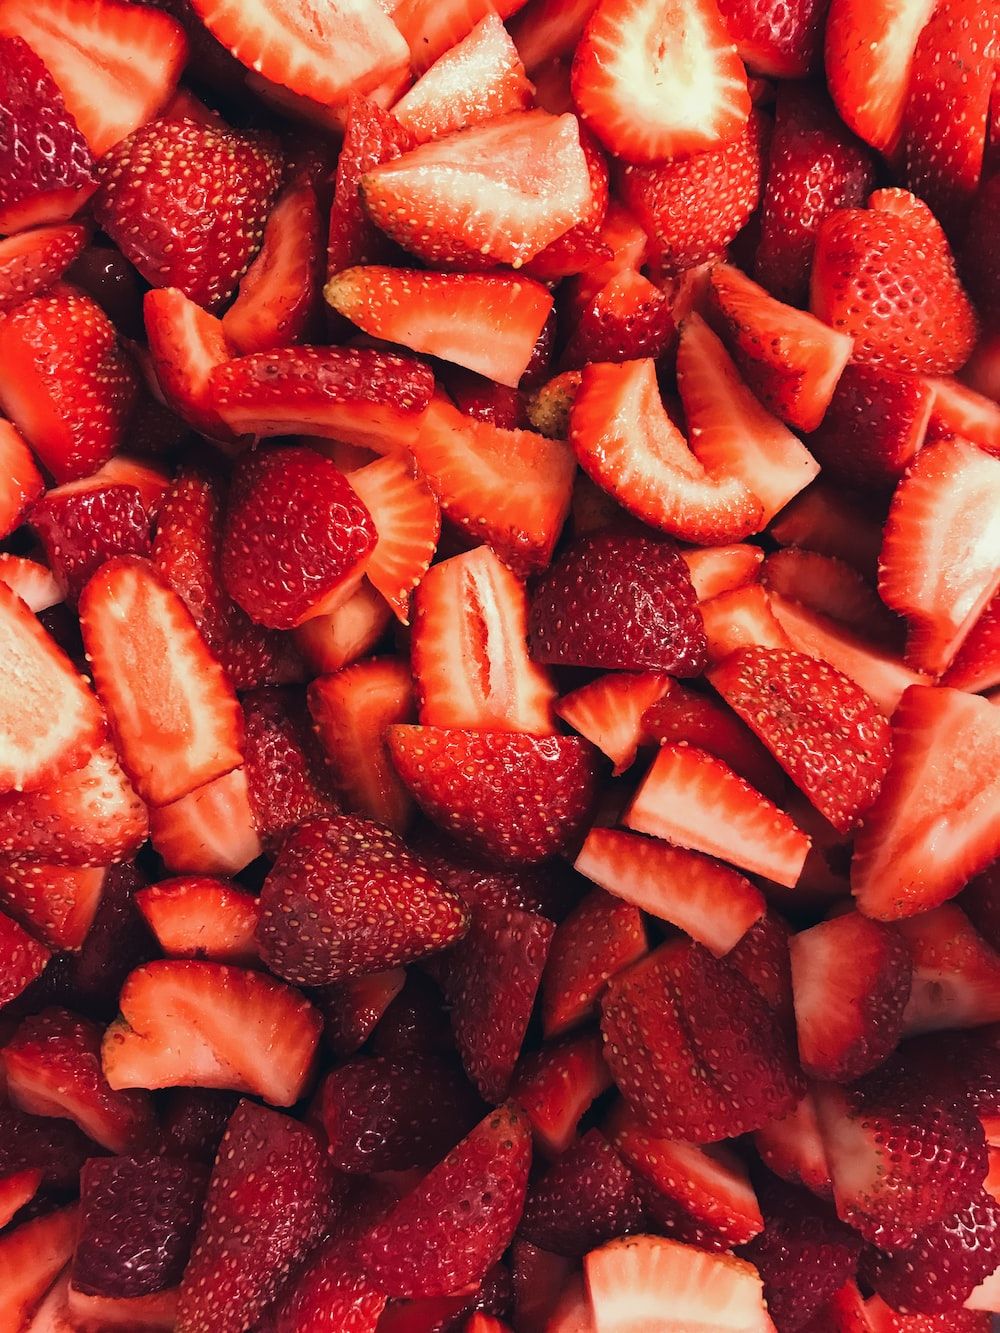 Strawberrys Picture. Download Free Image